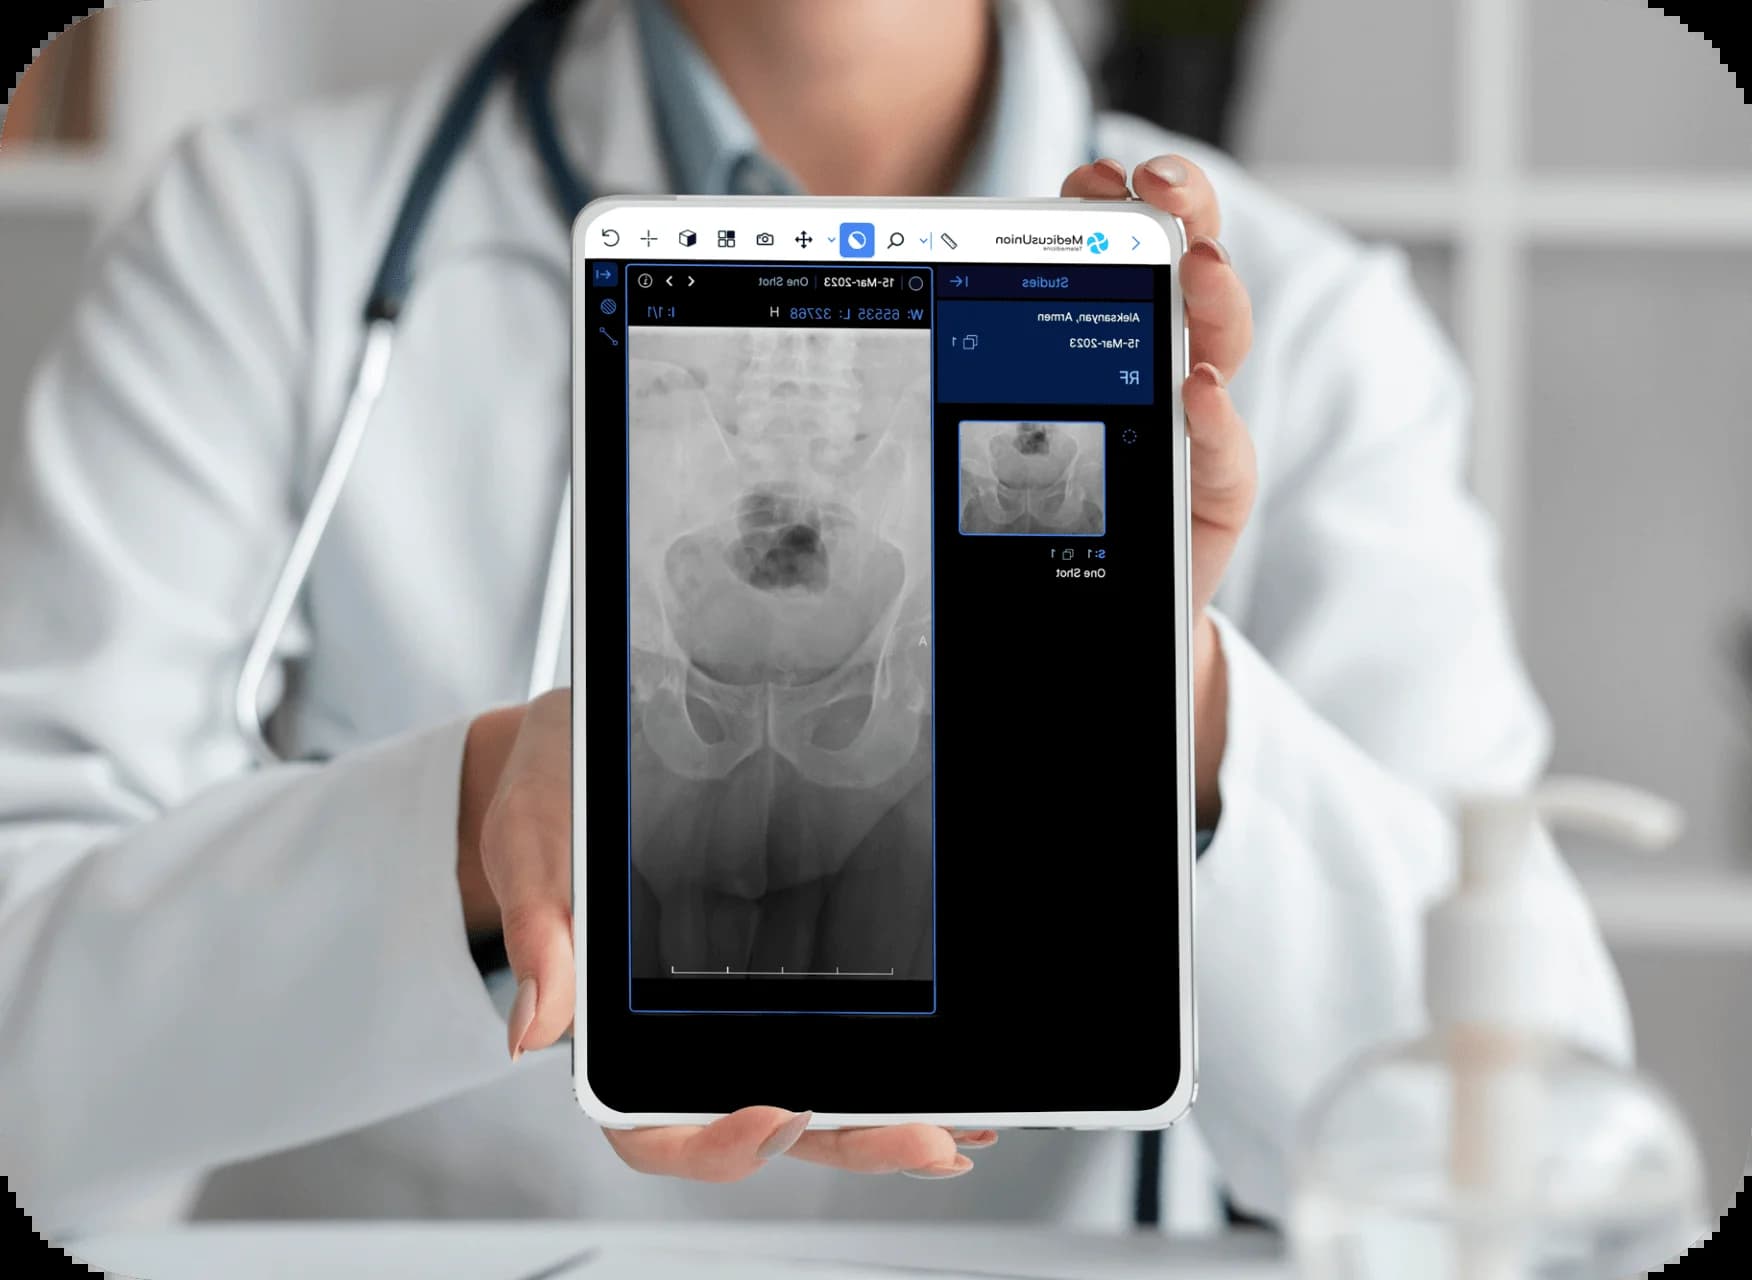 A pelvis scan displayed on a doctor's tablet offers valuable information to medical professionals.